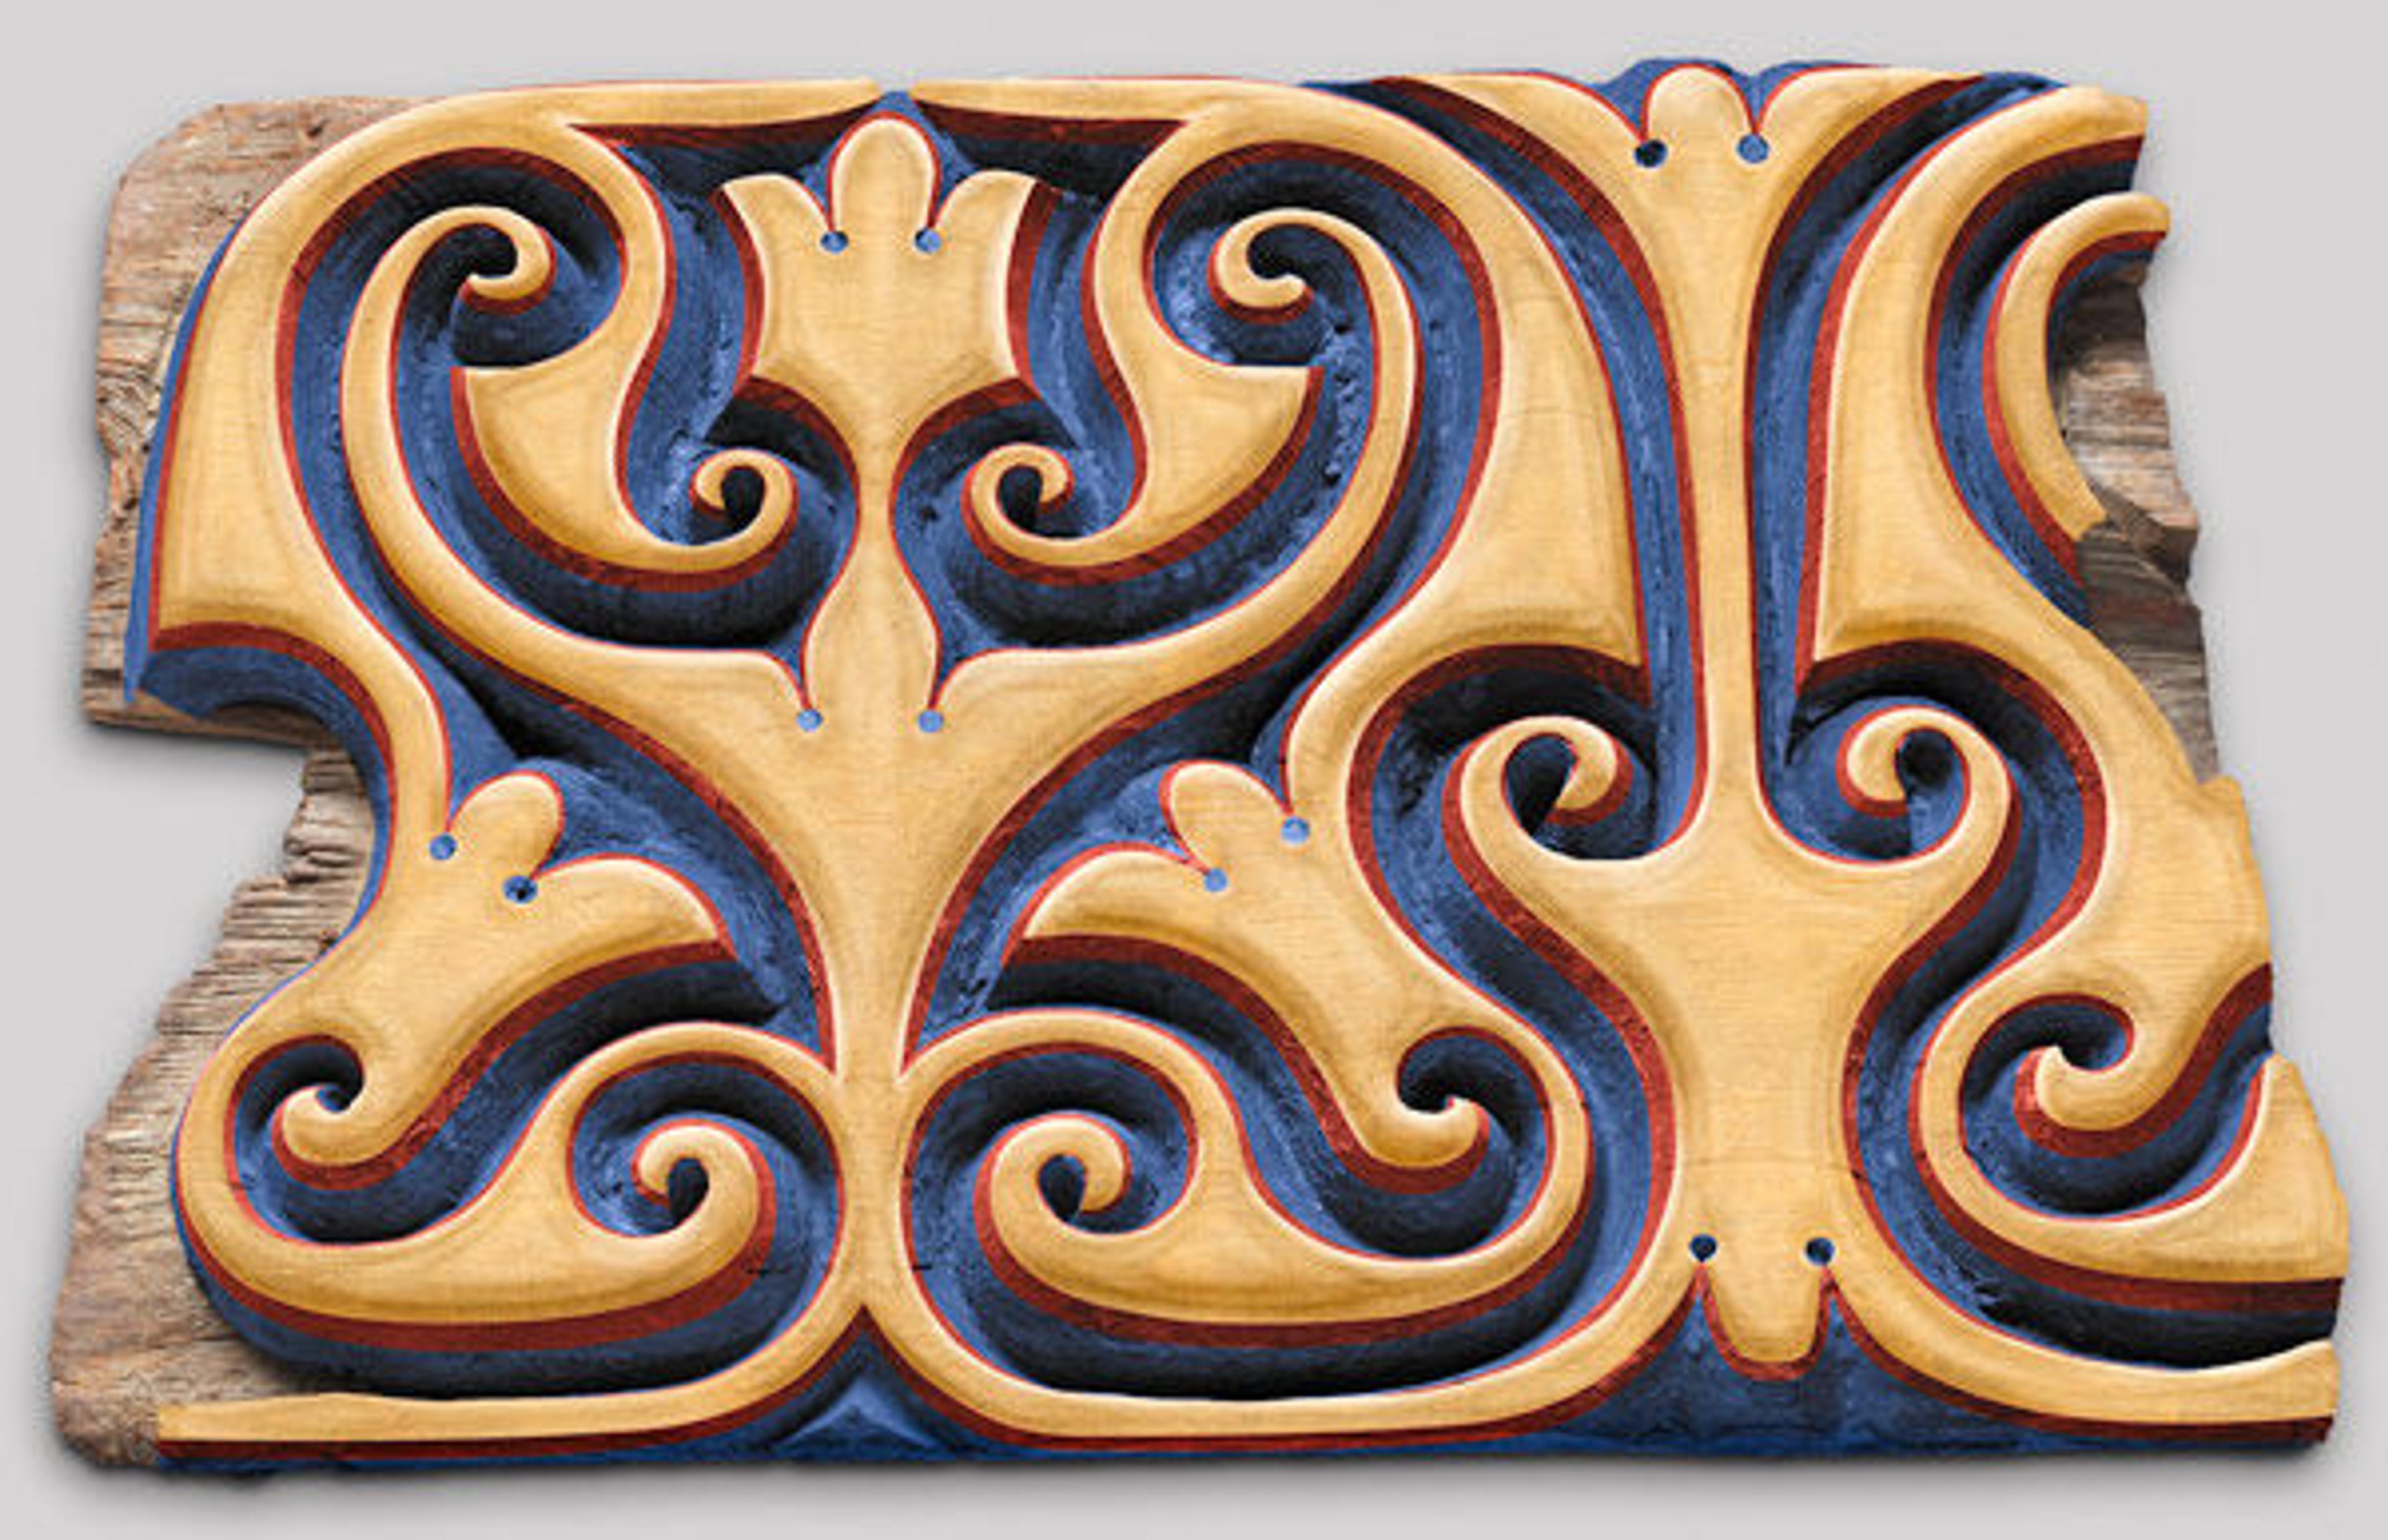 Fig. 10. Hypothetical reconstruction of the painted and gilded decoration on the panel. Since traces of the gilding were only found on the upper half of the beveled edge of the carved ornament, the gilding on the top surface is speculative. Digital reconstruction by Chris Heins, associate imaging specialist in the Met's Photograph Studio